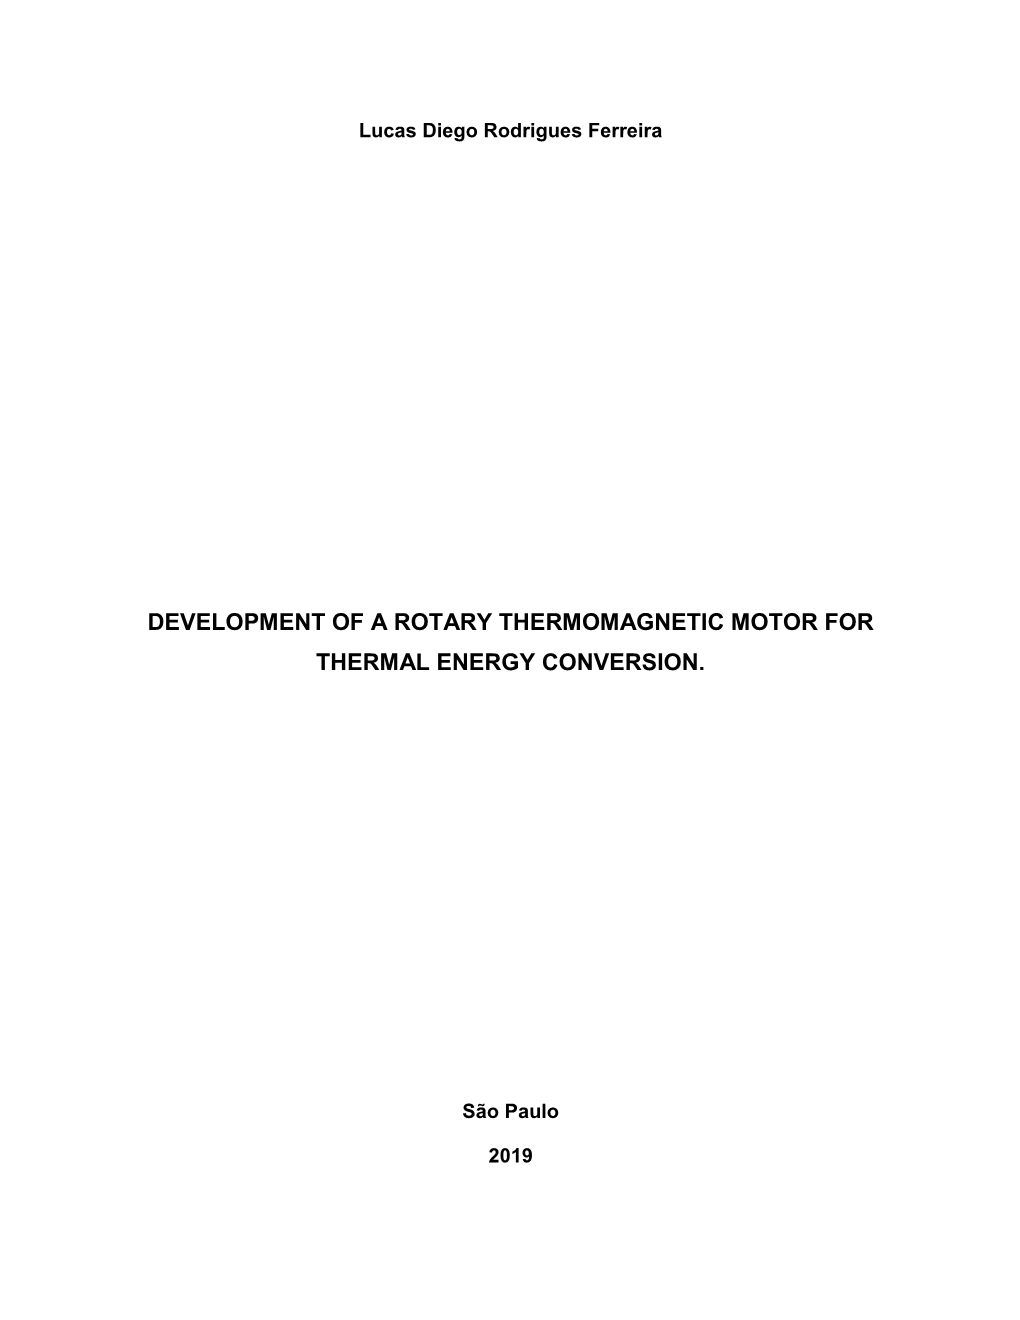 Development of a Rotary Thermomagnetic Motor for Thermal Energy Conversion